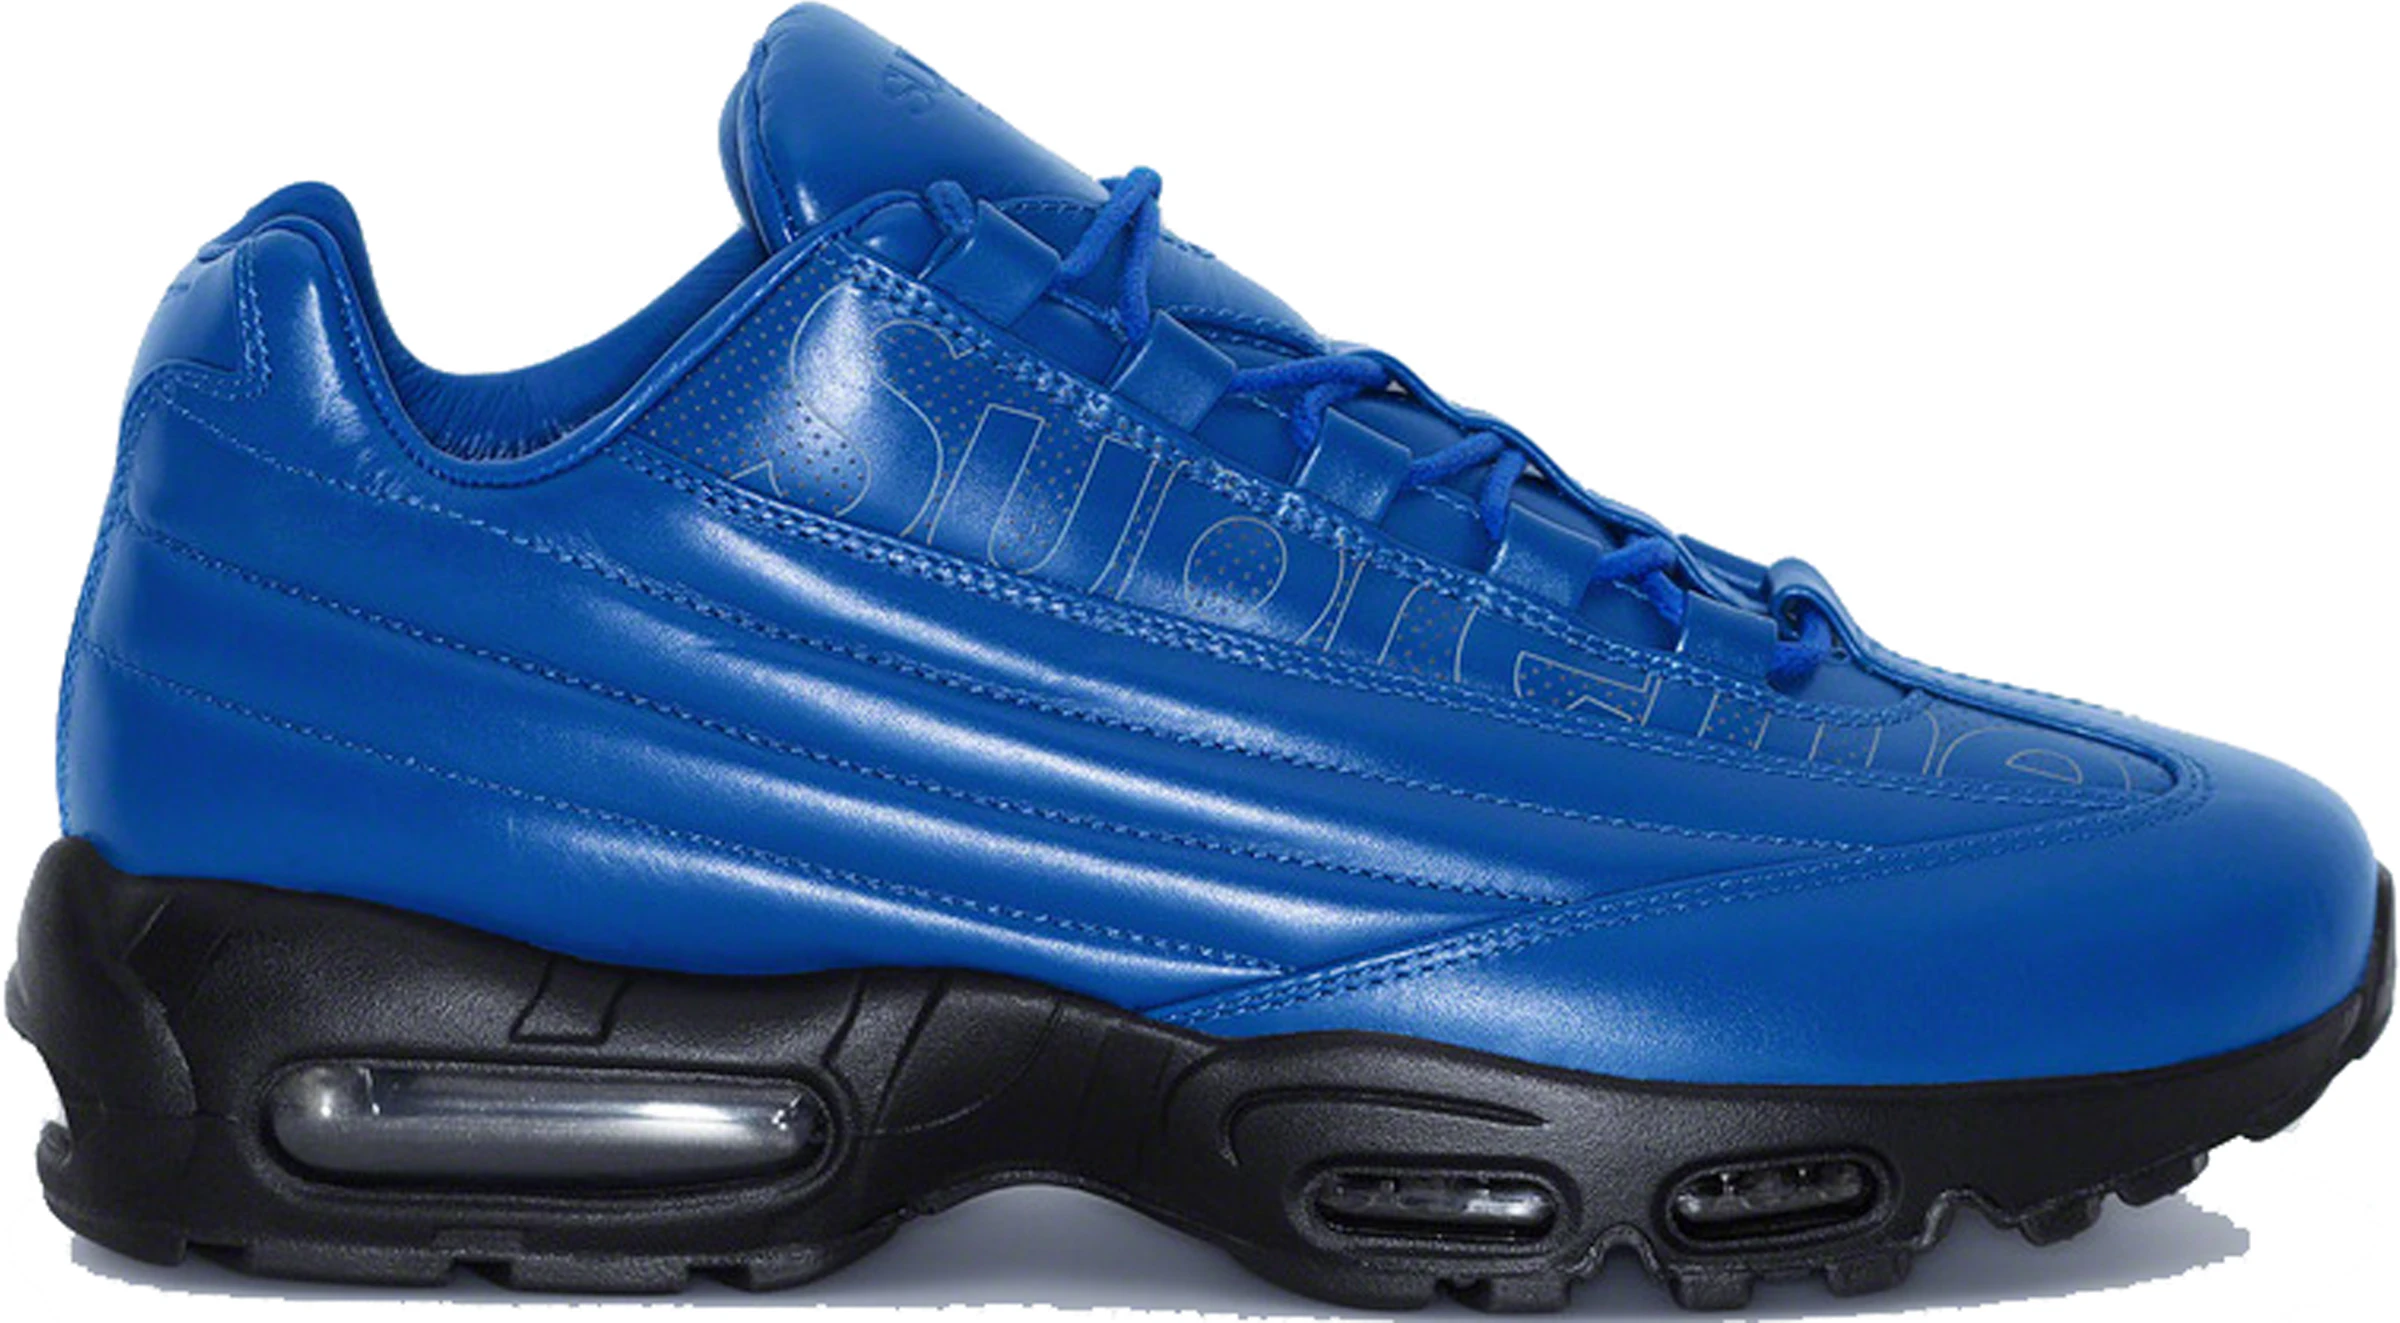 Nike Air Max 95 Shoes - Average Sale Price